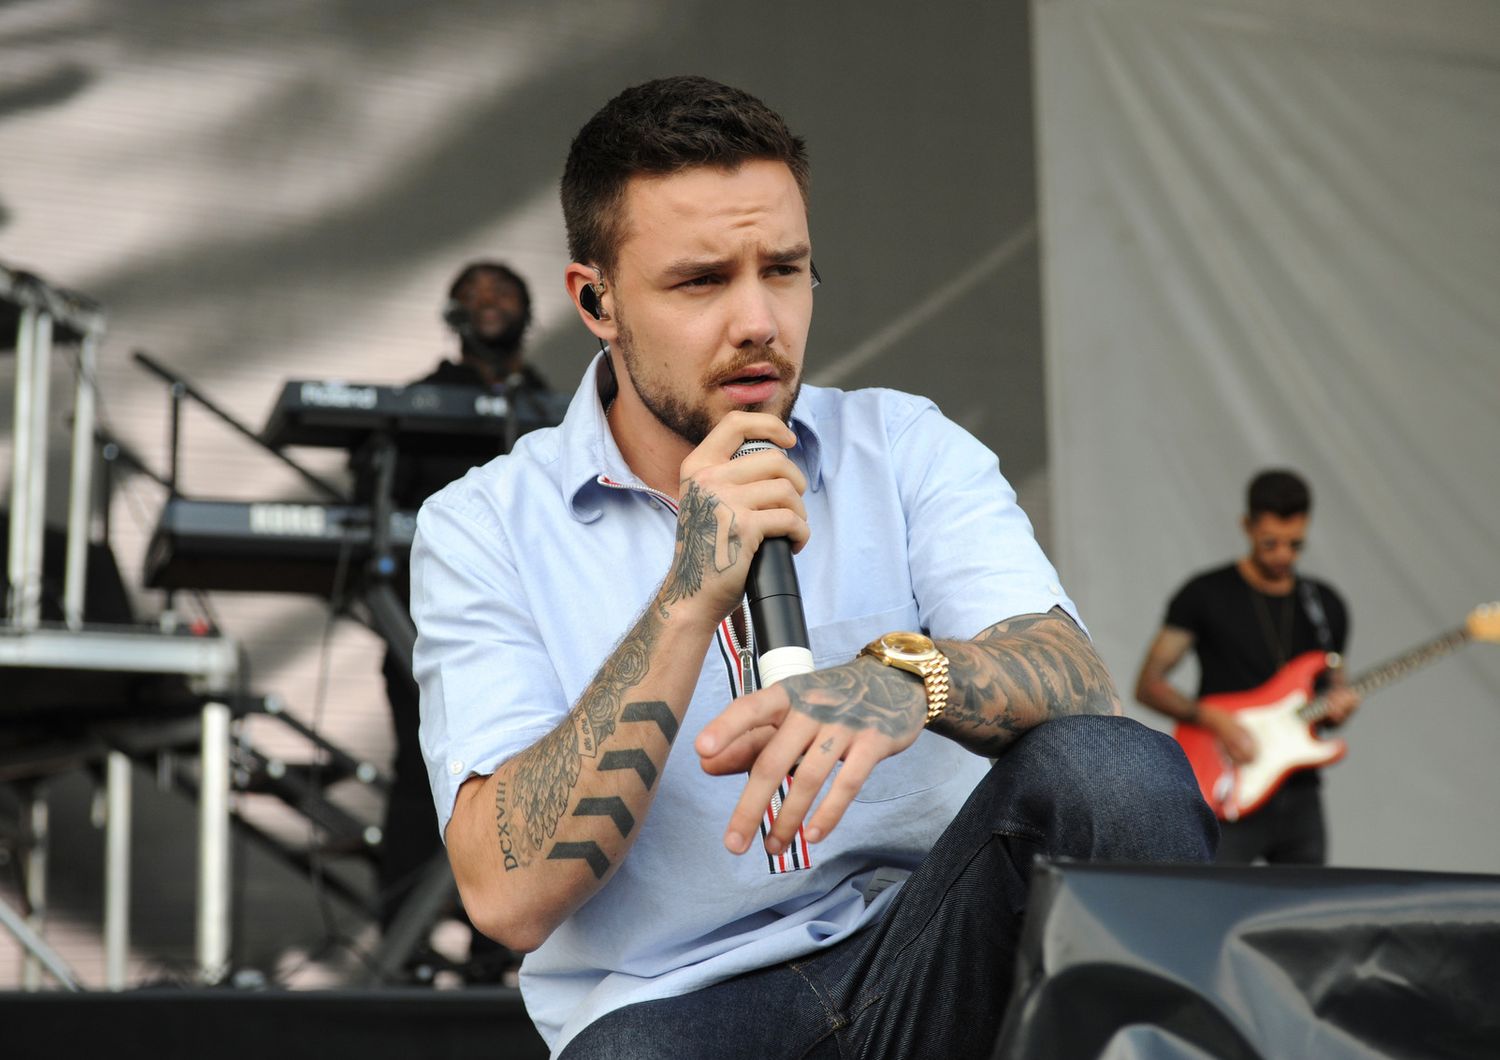 &nbsp;Liam Payne, One Direction